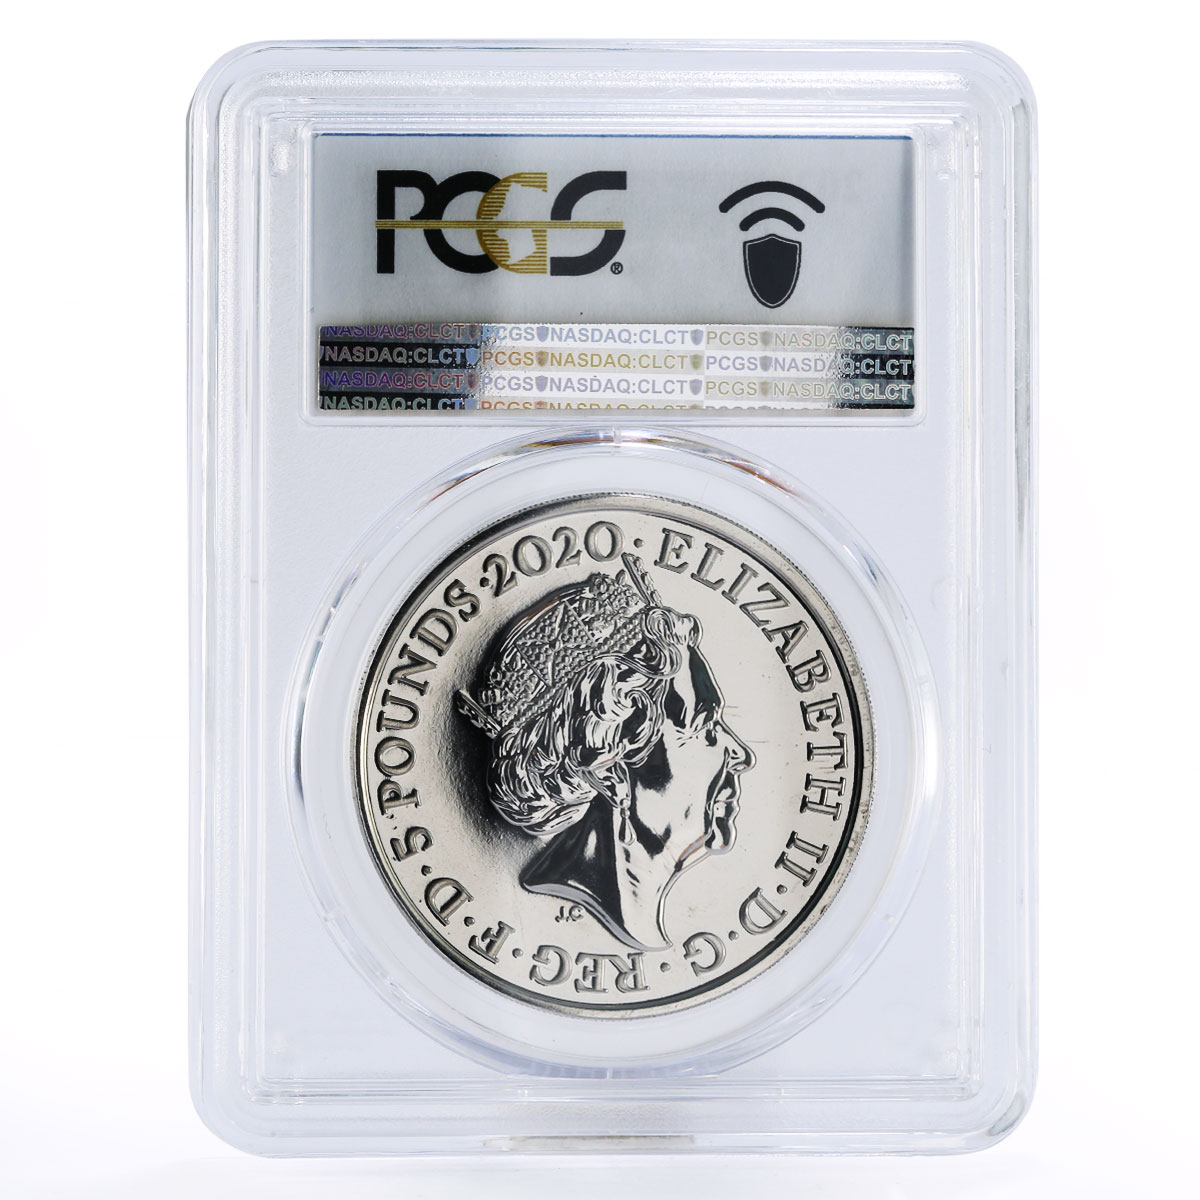 Britain 5 pounds Bondiana series Shaken not Stirred MS68 PCGS CuNi coin 2020